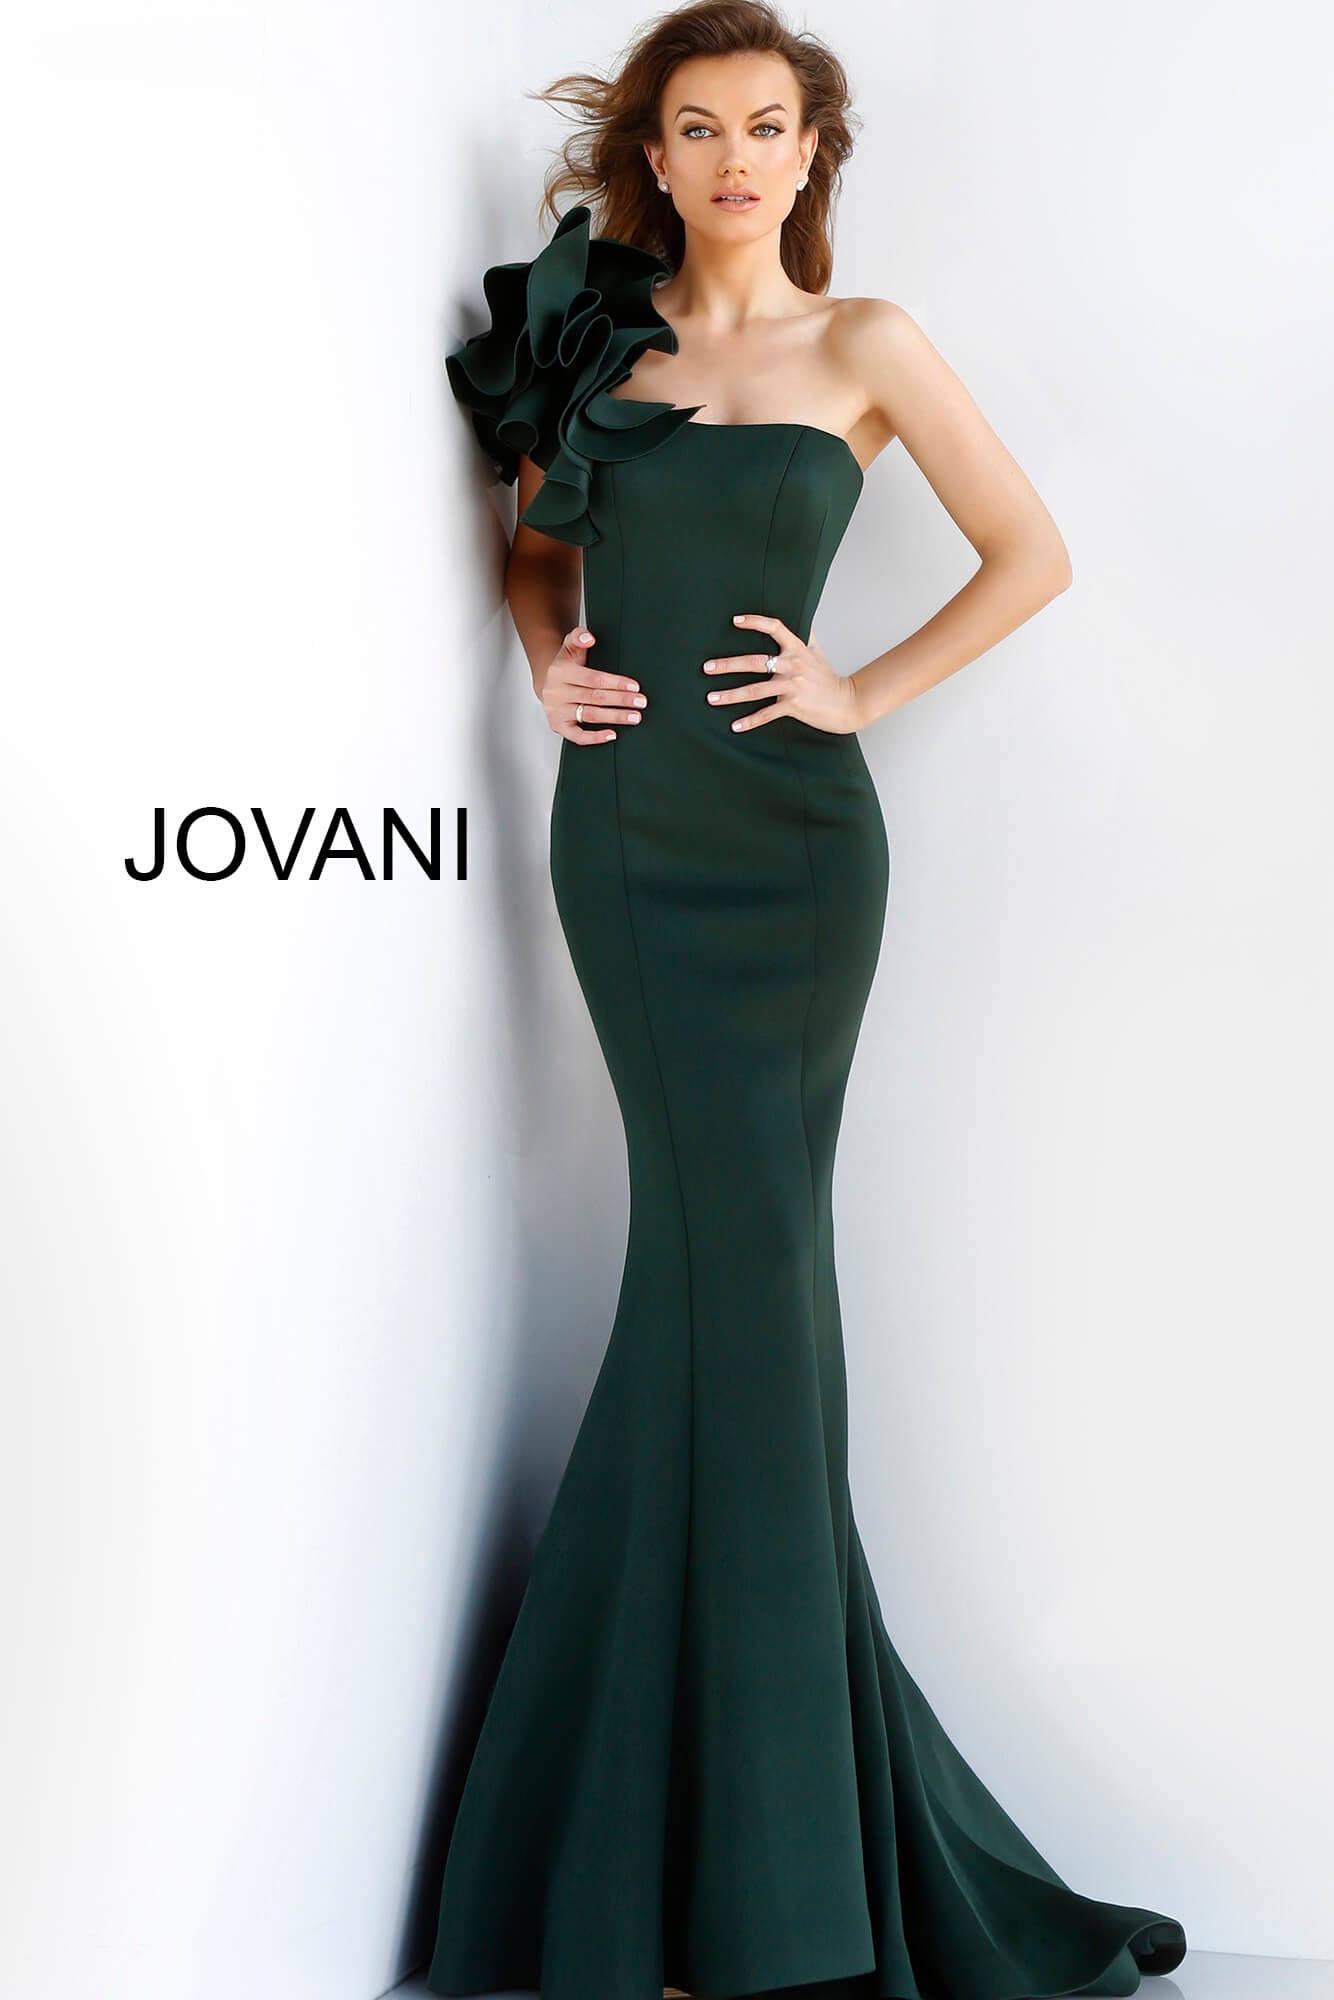 Jovani 37094 Long Prom Dress Corset Embellished Bodice Sheath One Shoulder  High Slit Ruching Side Tail formal Pageant Gown